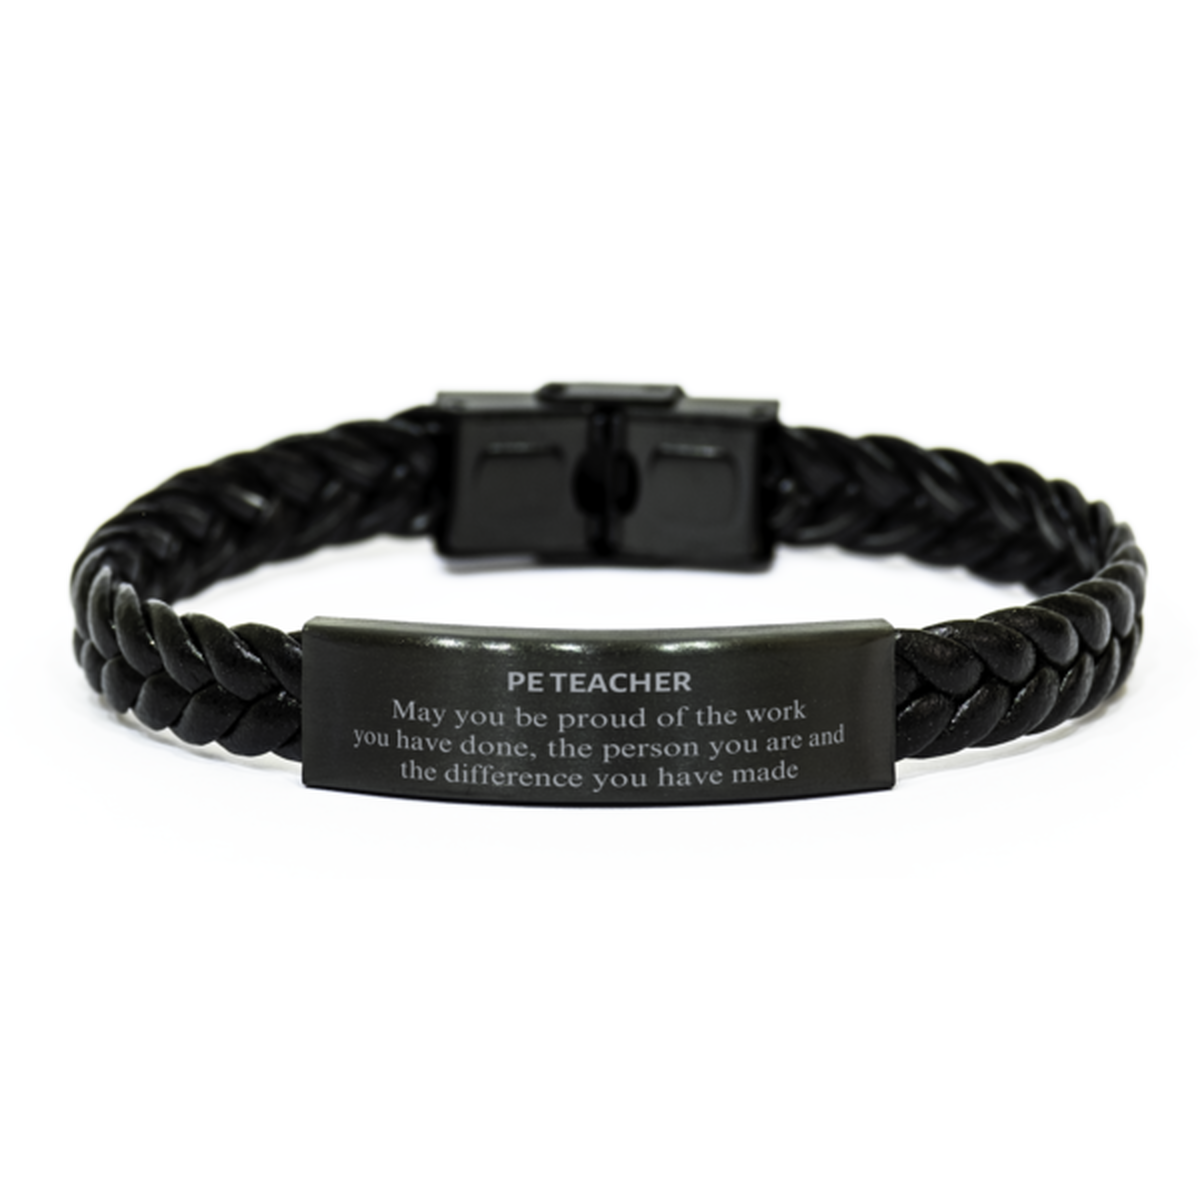 PE Teacher May you be proud of the work you have done, Retirement PE Teacher Braided Leather Bracelet for Colleague Appreciation Gifts Amazing for PE Teacher